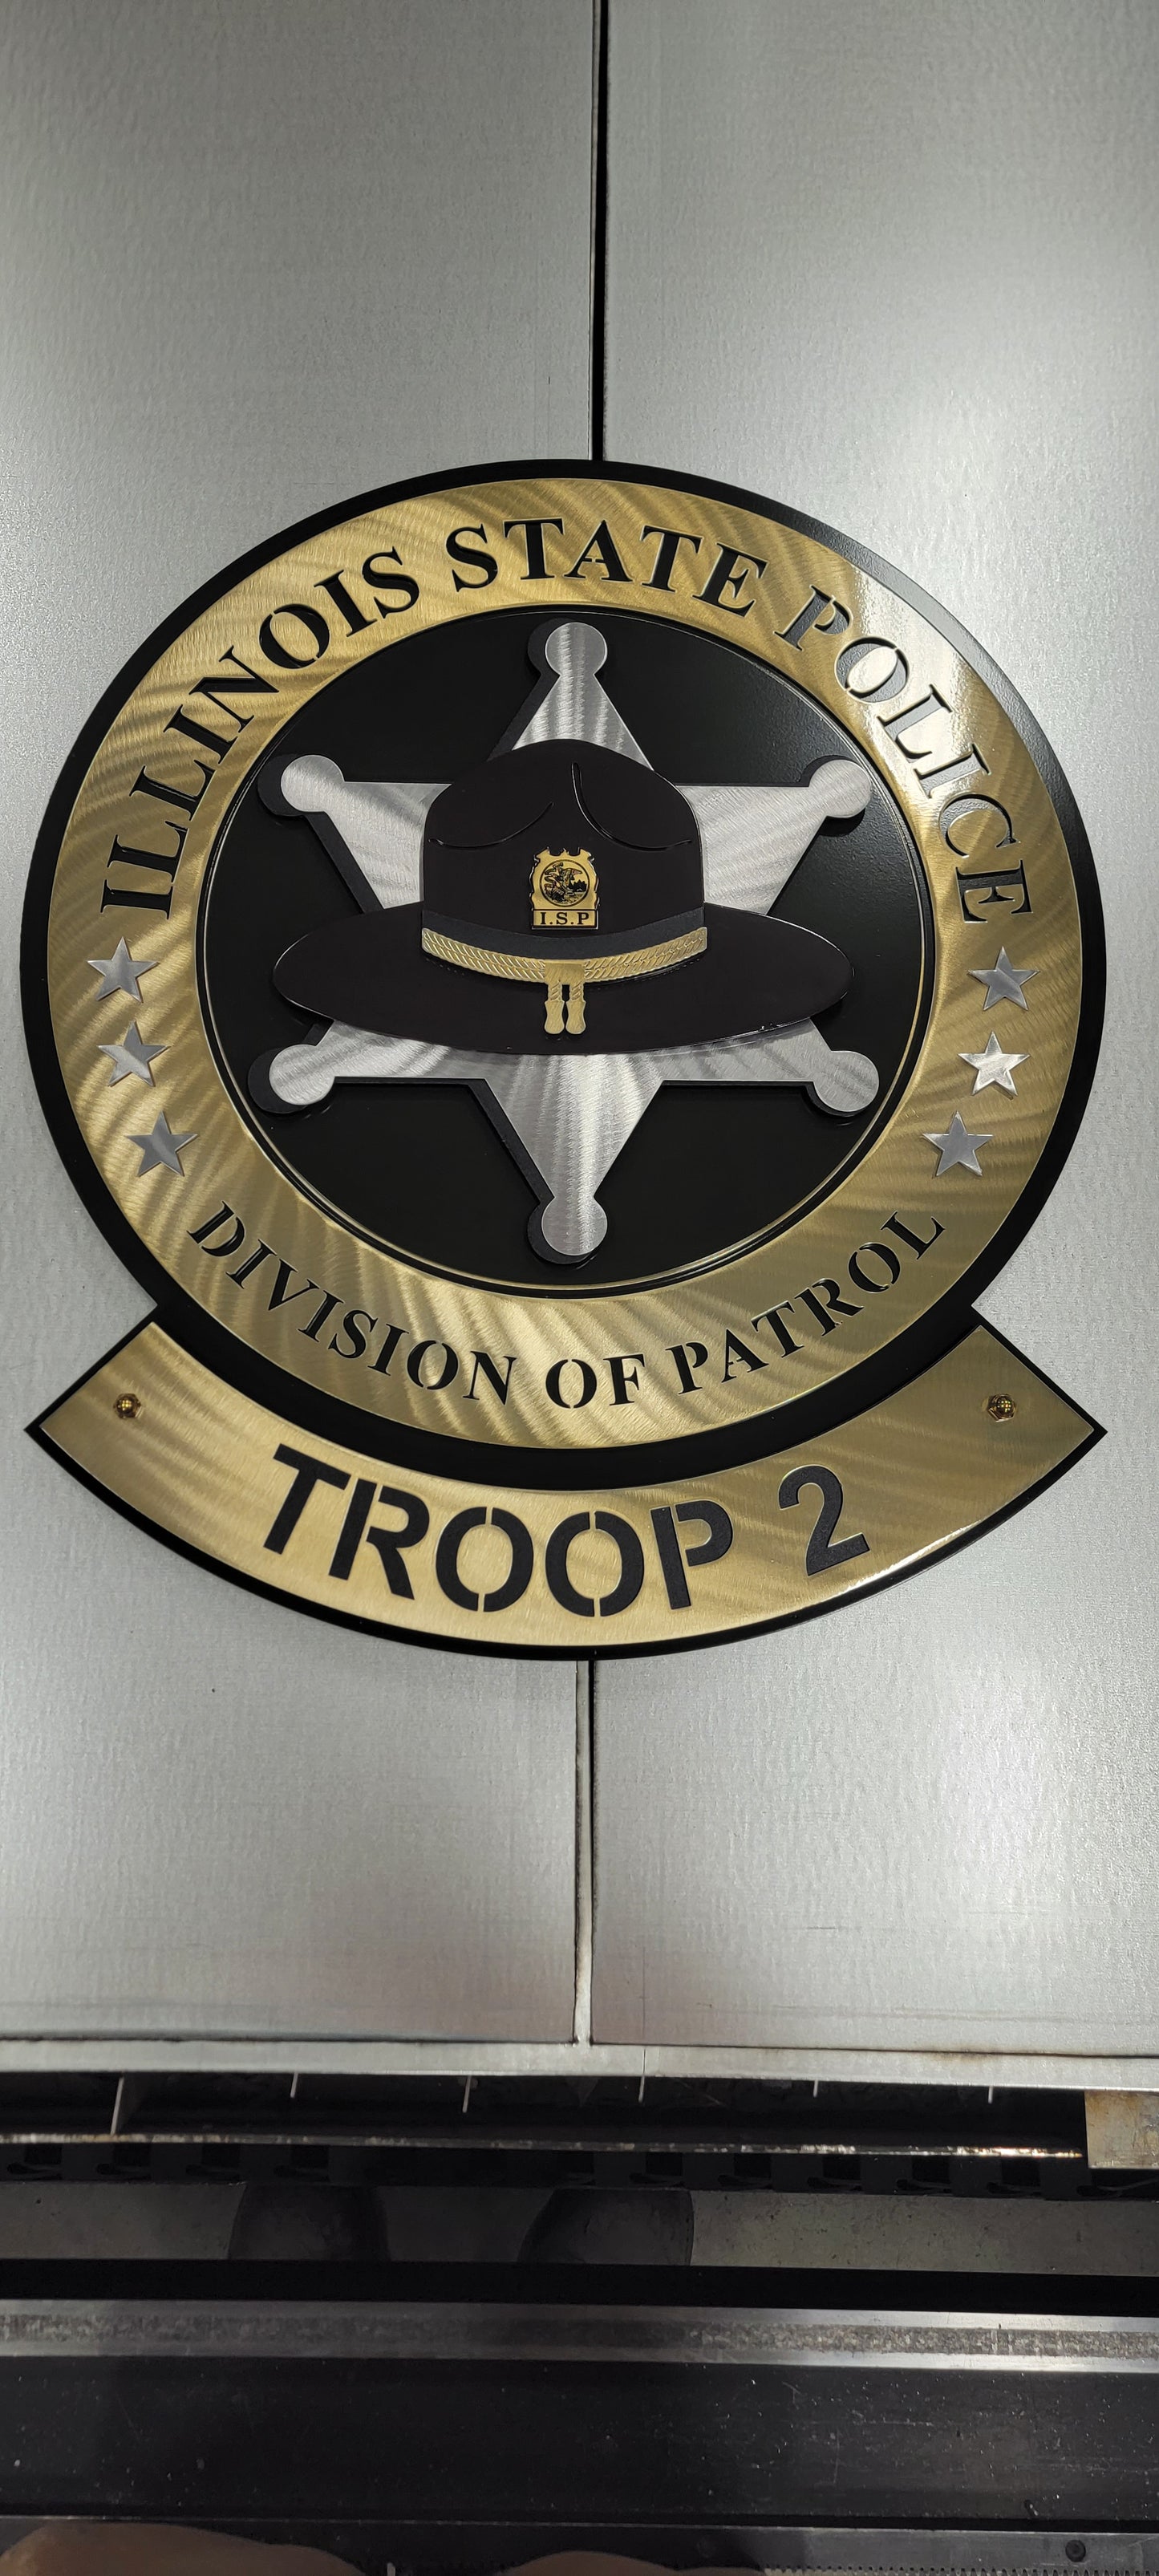 Illinois State Police Division Of Patrol Troop 2